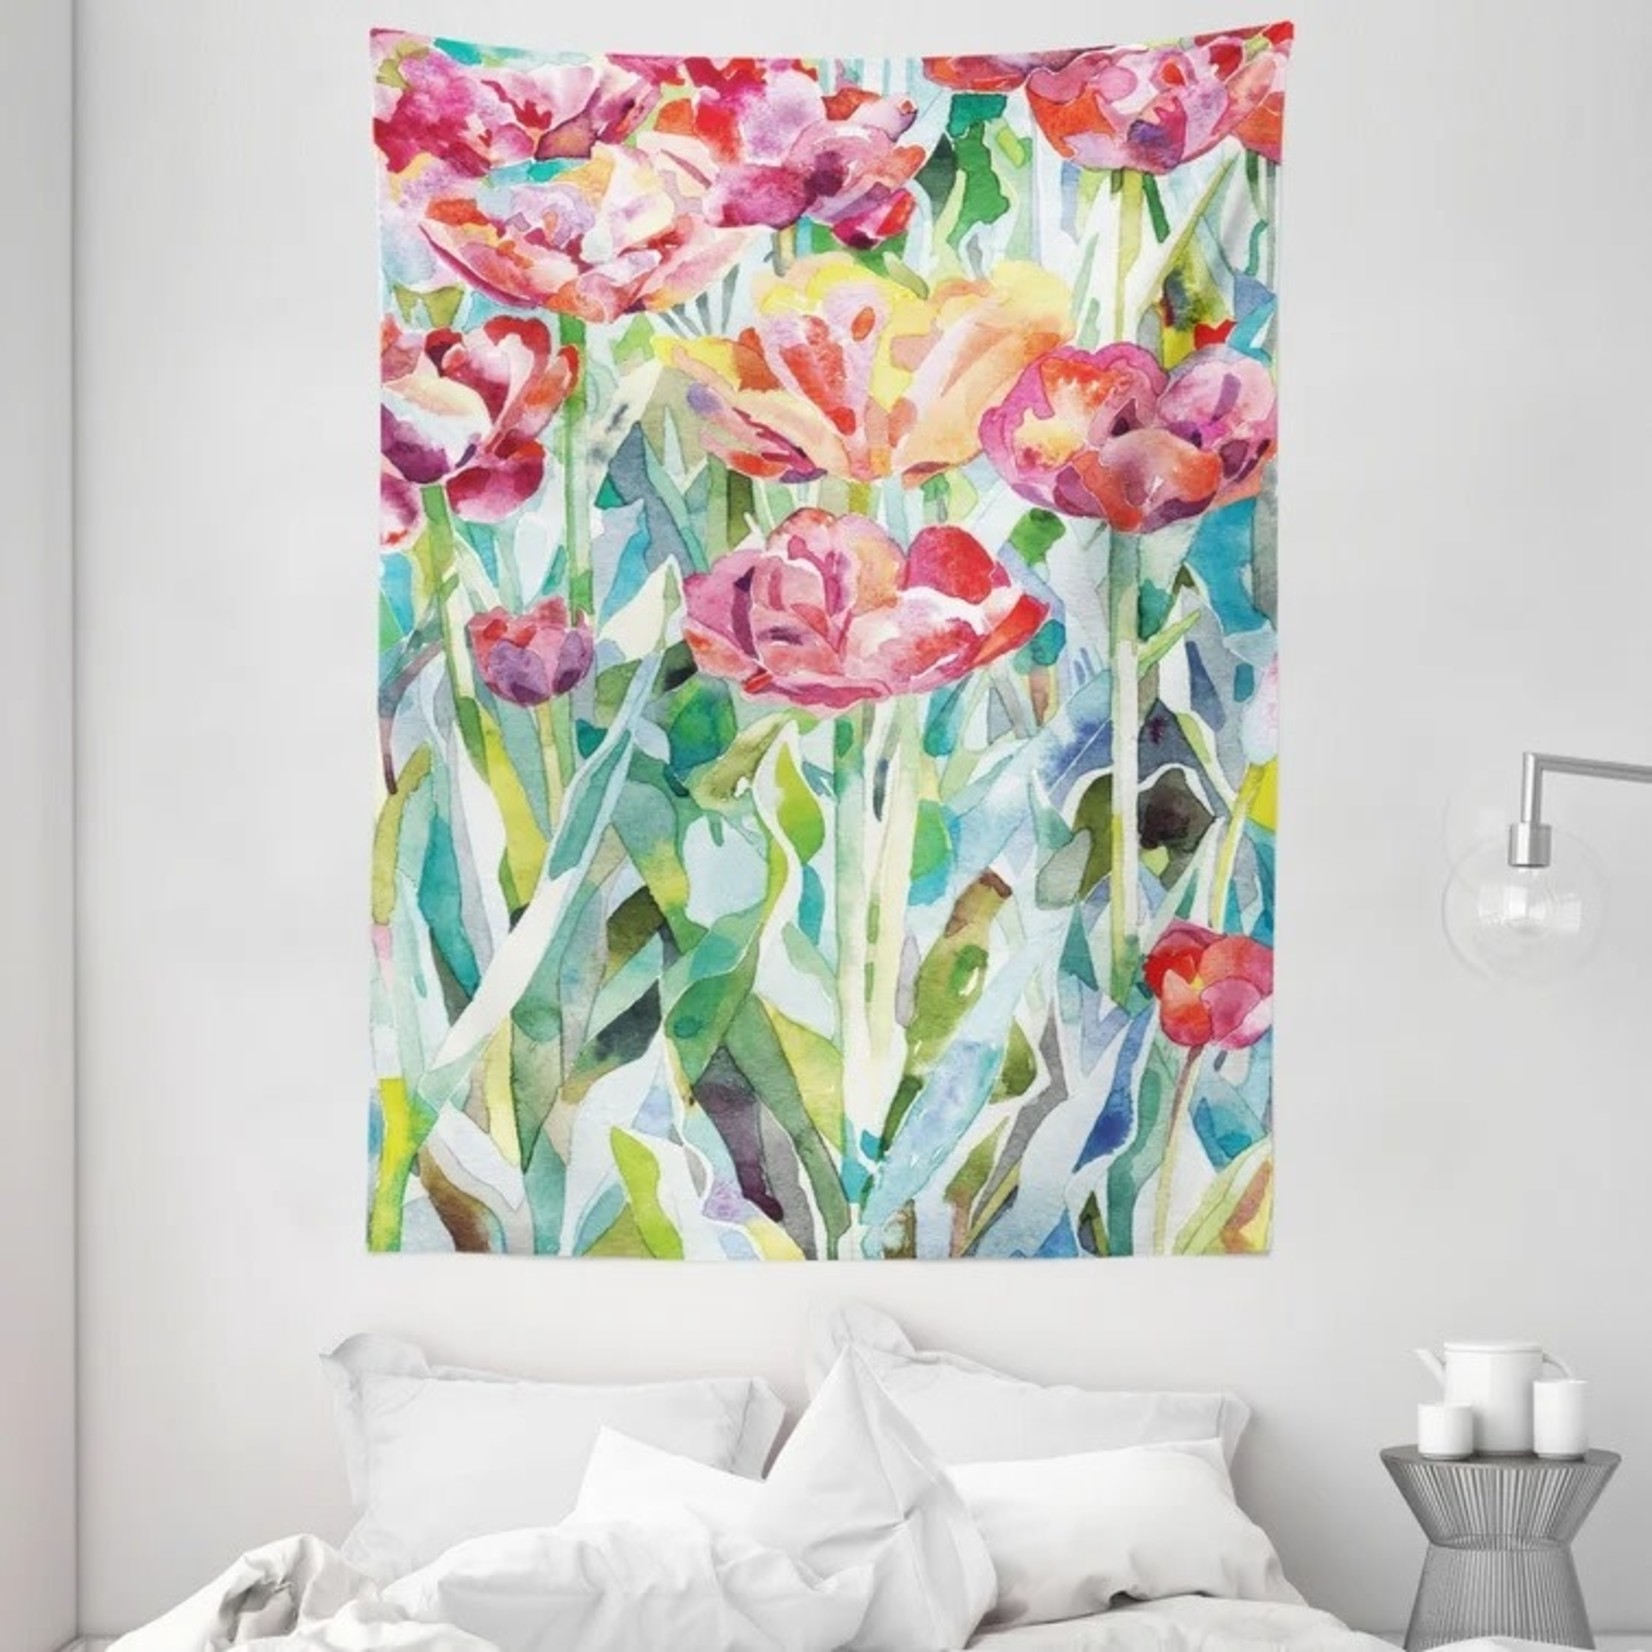 *Ambesonne Watercolor Flower Tapestry, Painting Spring Flowers, Wall Hanging